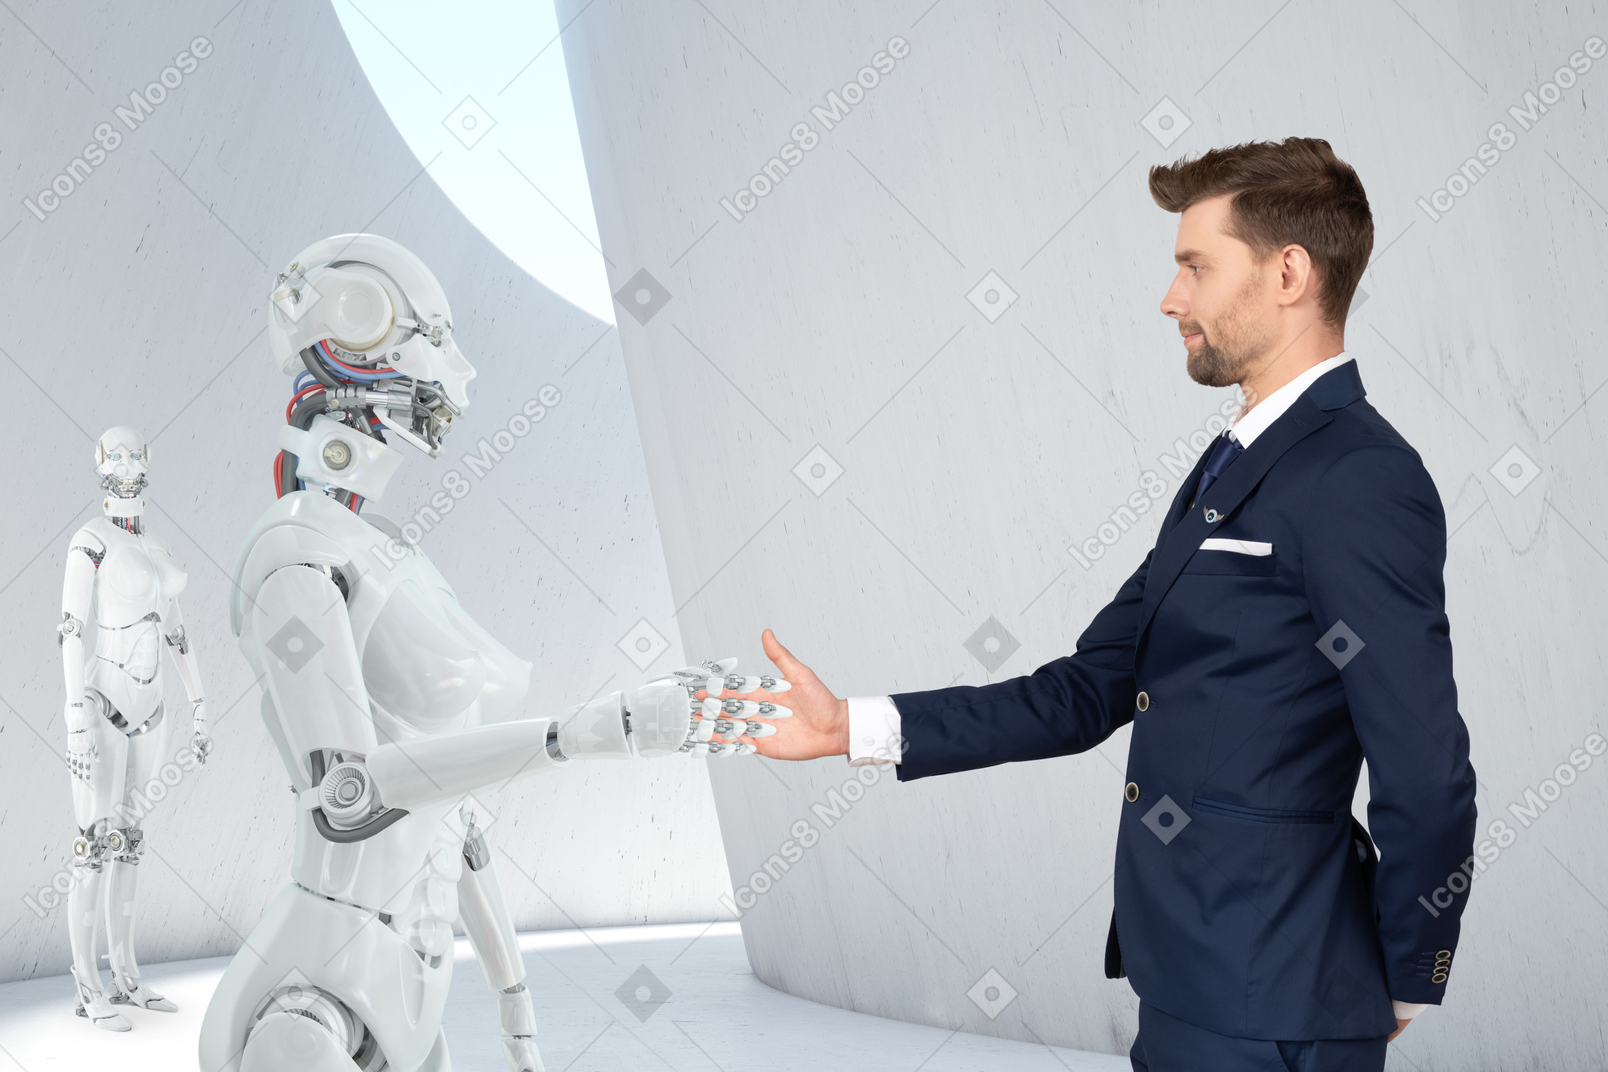 A stylish man holds the woman-robot`s hand while another woman-robot is waiting for her aside